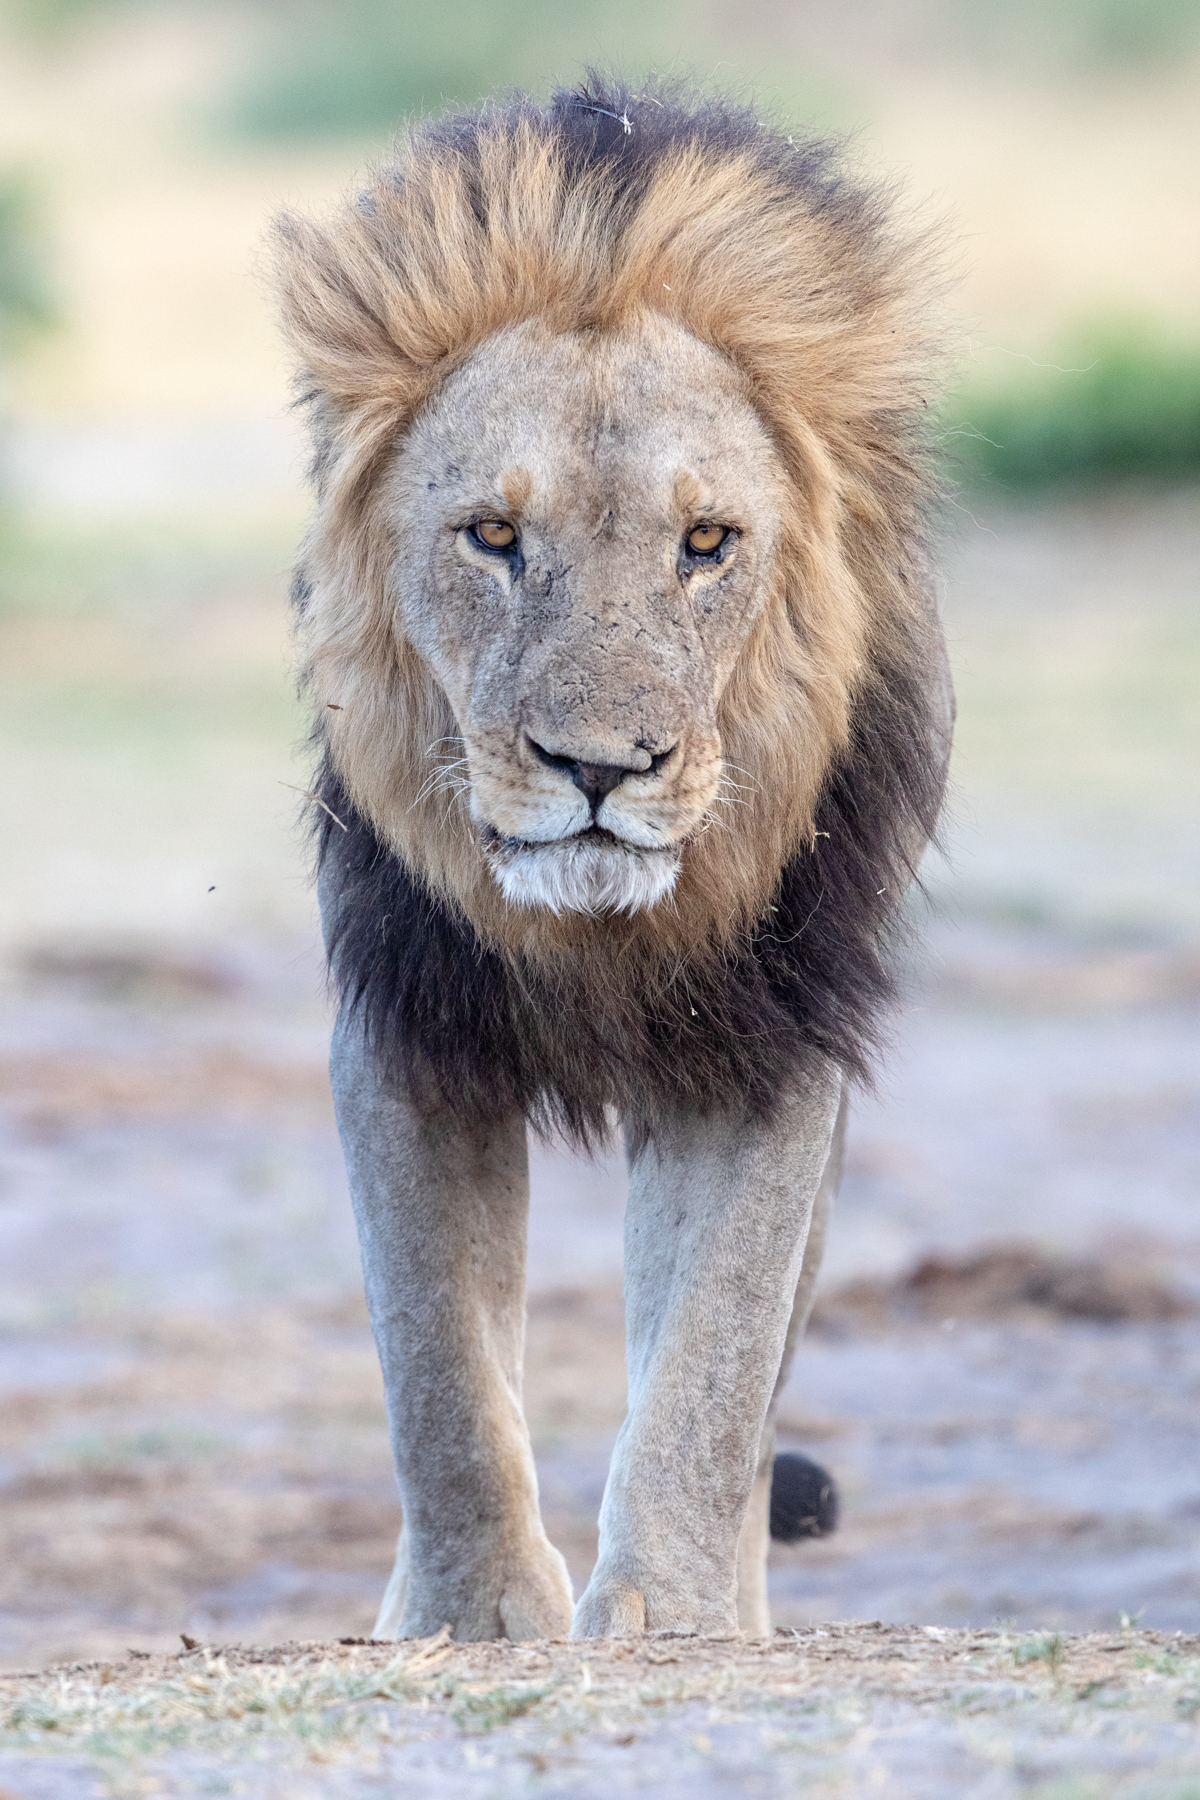 A male Lion is a truly impressive beast